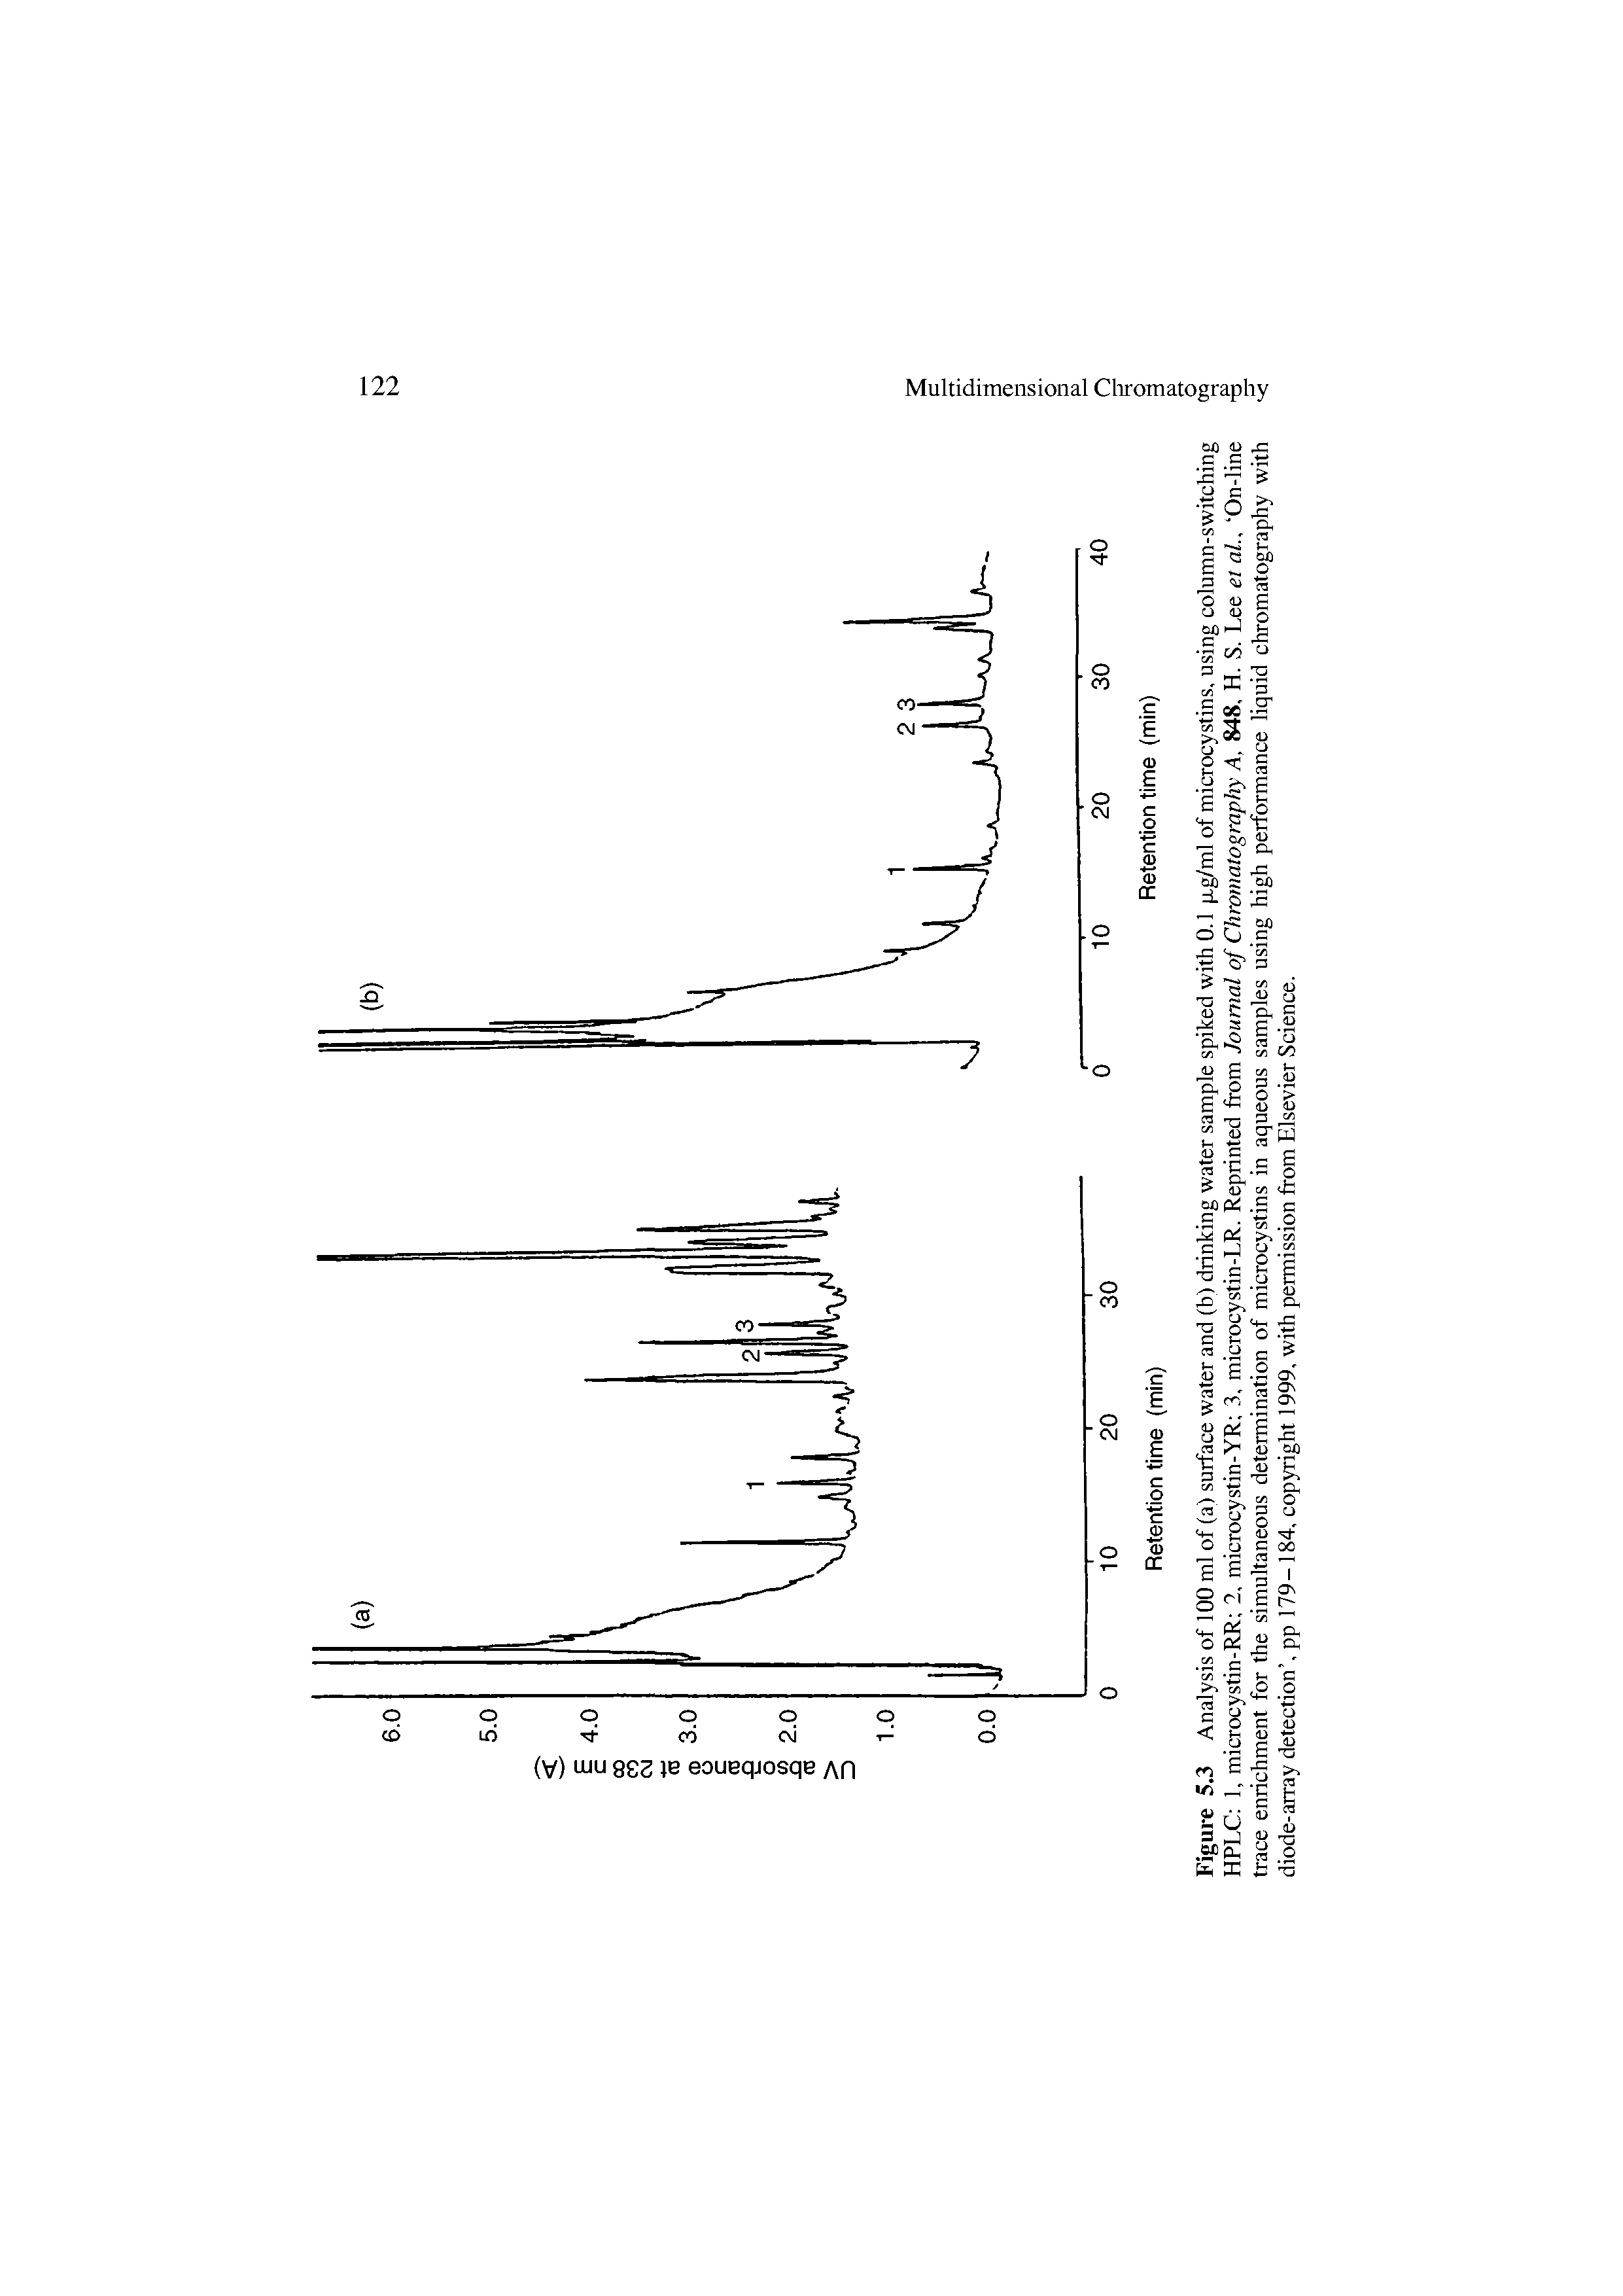 Figure 5.3 Analysis of 100 ml of (a) surface water and (b) drinking water sample spiked with 0.1 pig/ml of microcystins, using column-switching HPLC 1, microcystin-RR 2, microcystin-YR 3, microcystin-LR. Reprinted from Journal of Chromatography A, 848, H. S. Lee et al, On-line trace enrichment for the simultaneous determination of microcystins in aqueous samples using high performance liquid chromatography with diode-array detection , pp 179-184, copyright 1999, with permission from Elsevier Science.